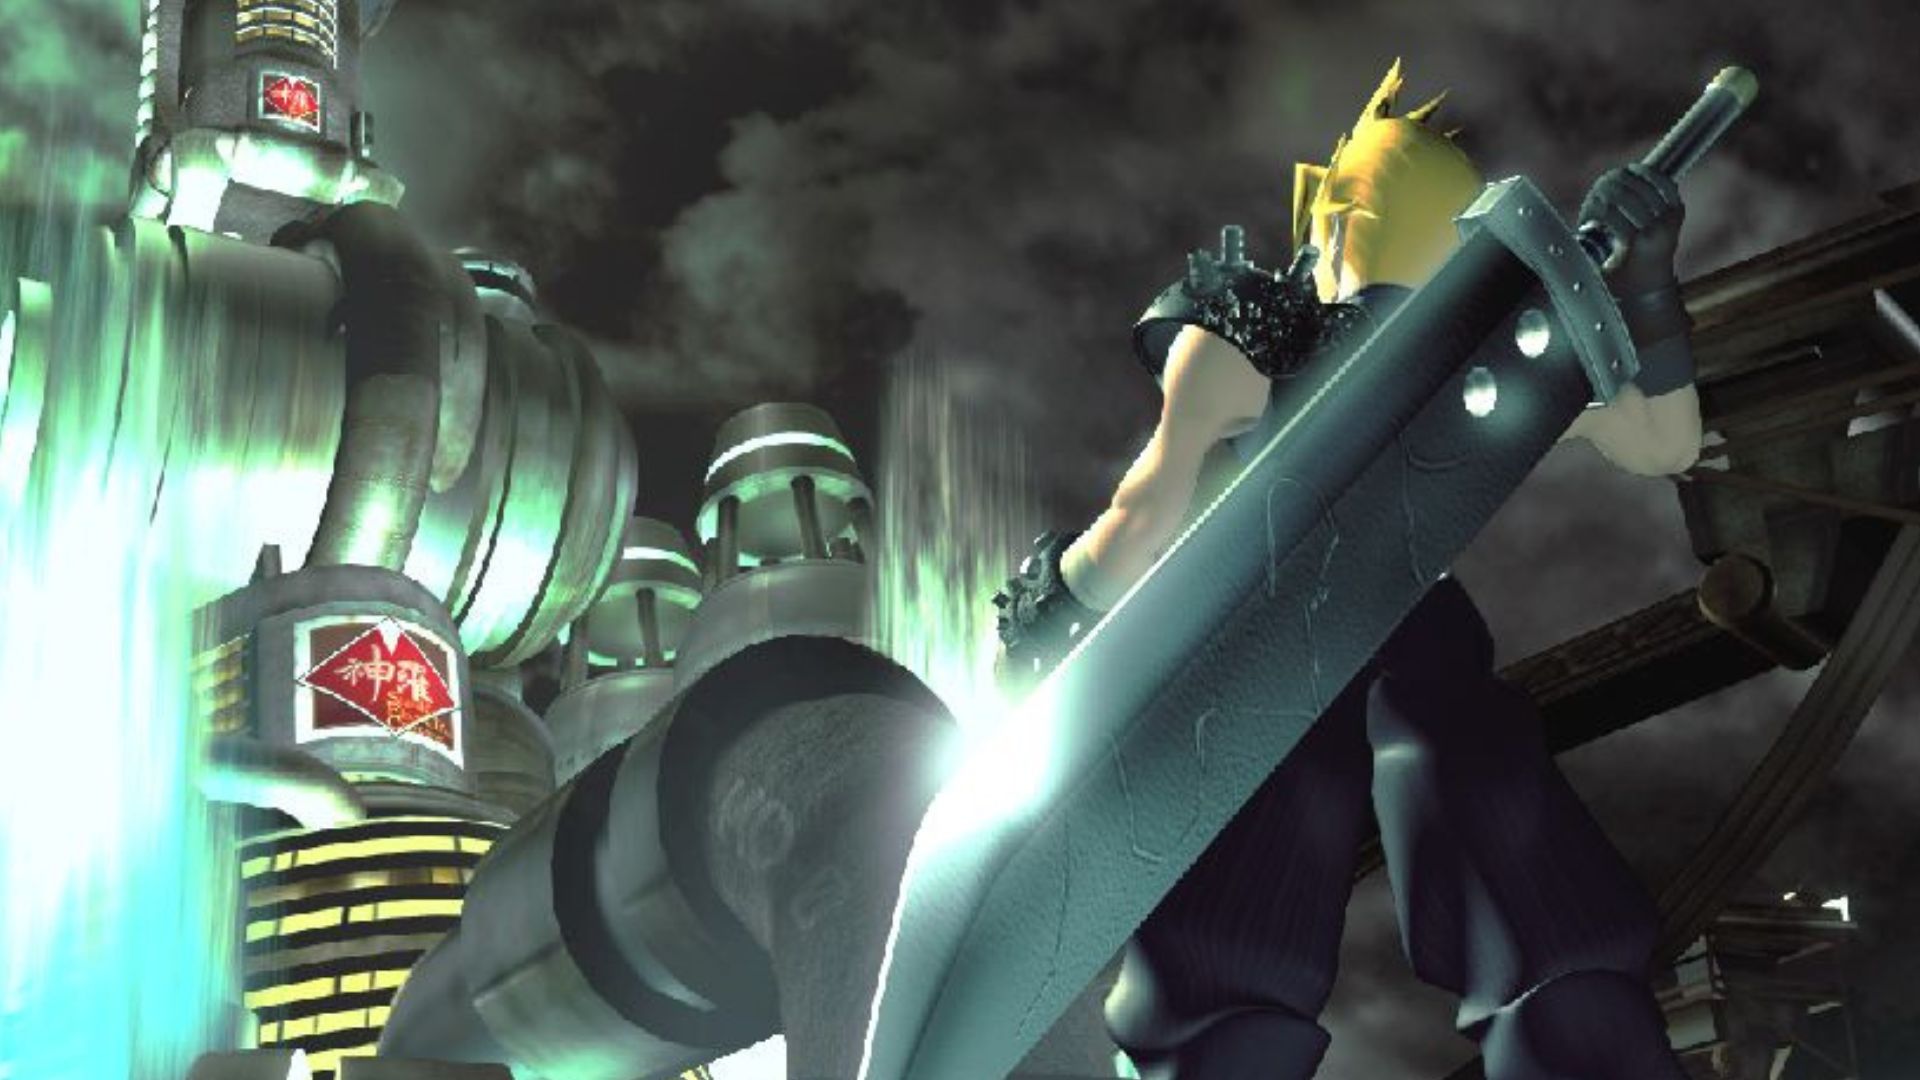 Cloud Strife from Final Fantasy VII, one of the many retro games on Switch, with the buster sword on his back, looking into the night sky.